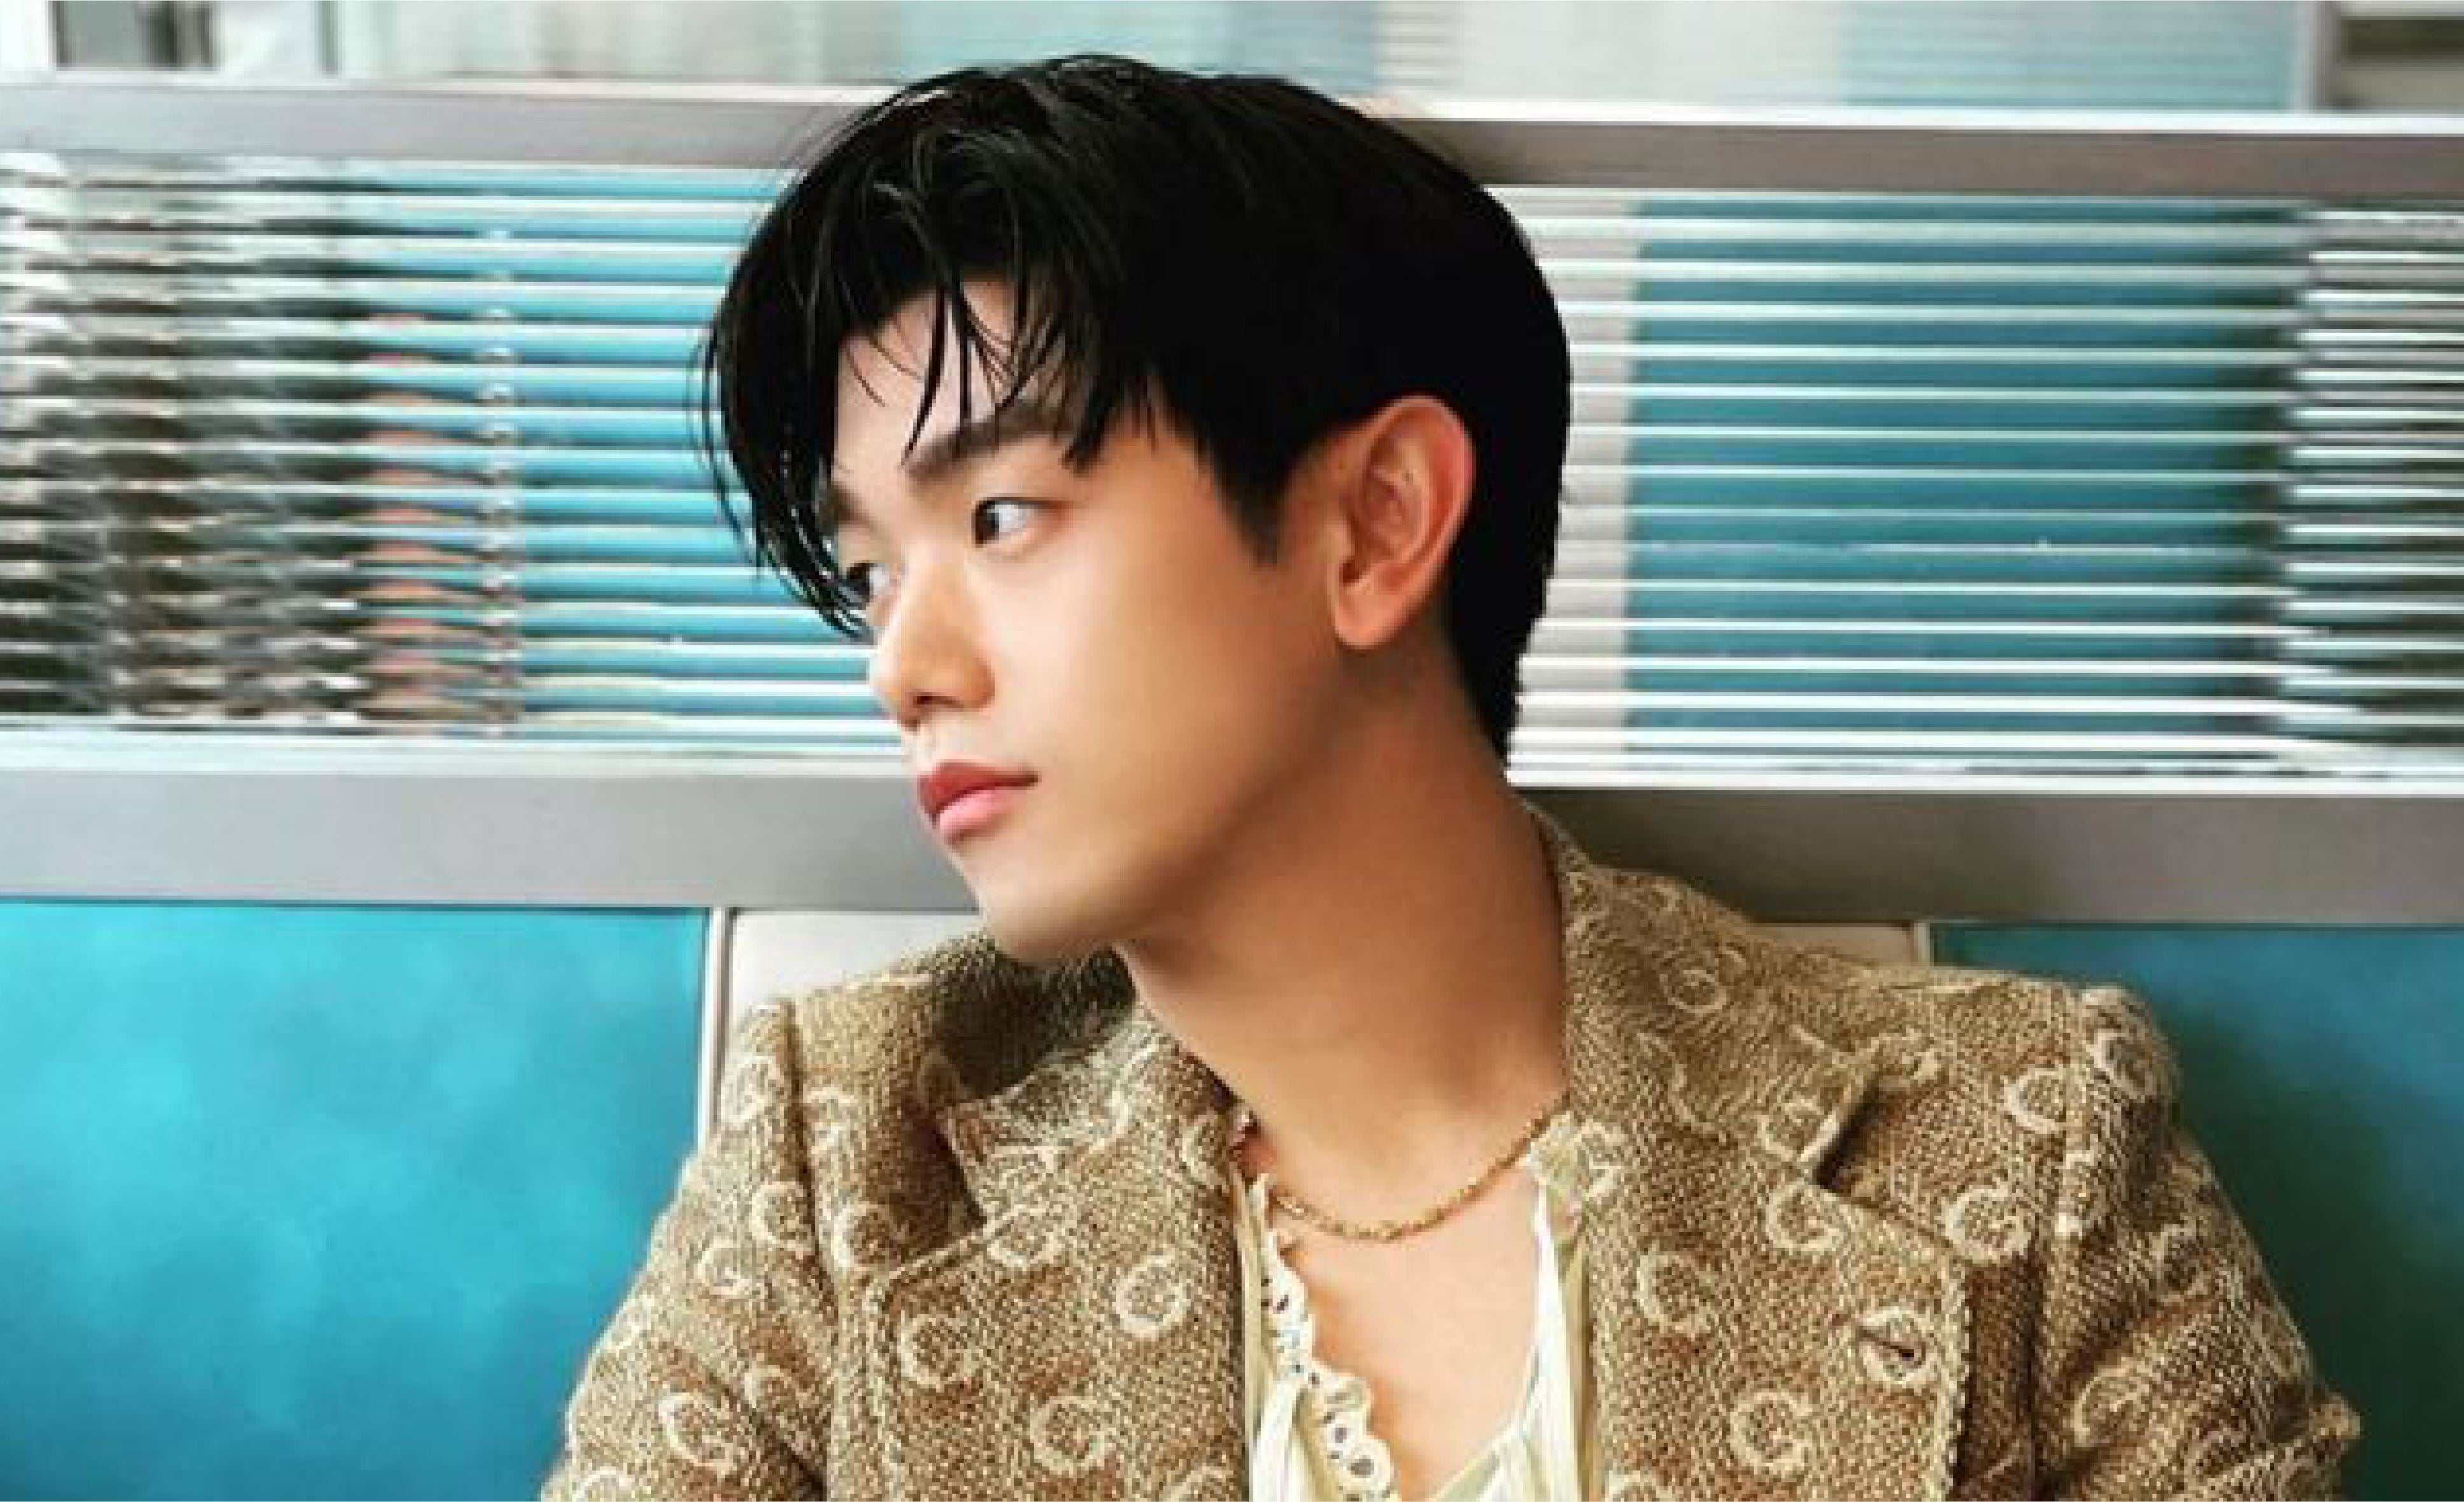 Hol dir jetzt Eric Nam’s neues Album “There and Back Again”!